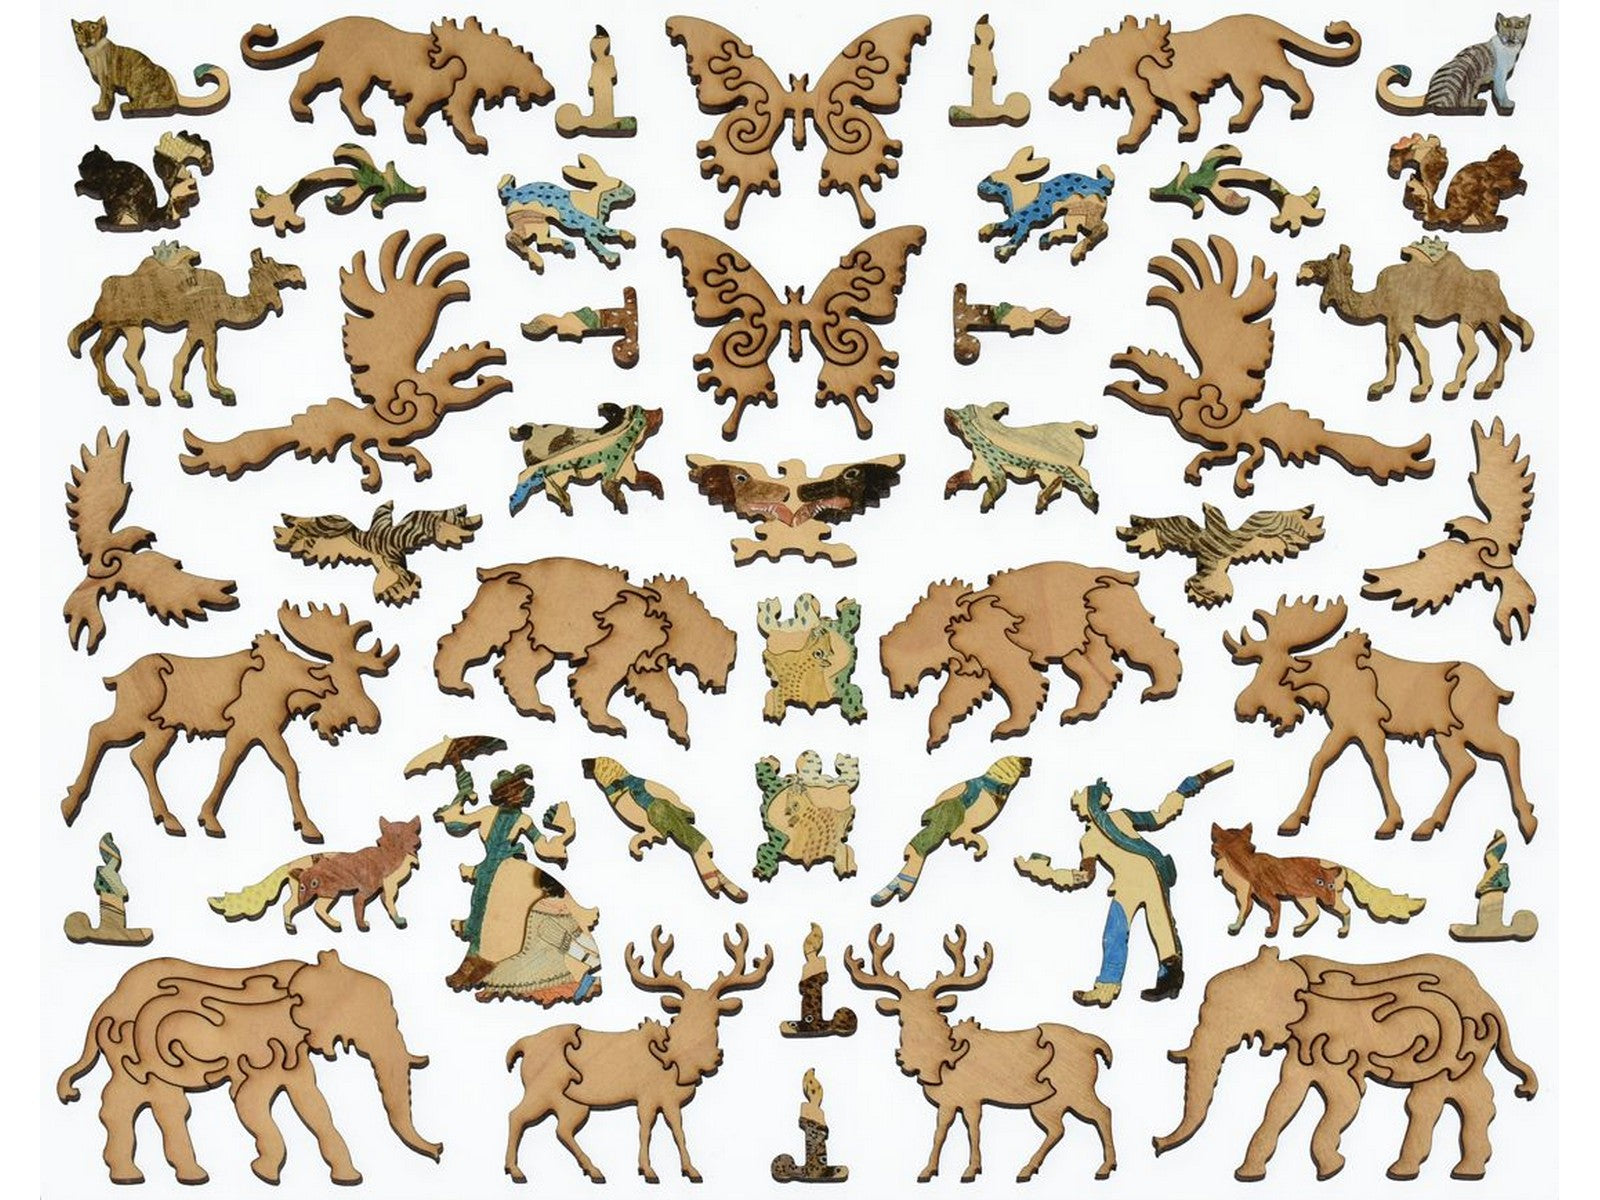 The whimsies that can be found in the puzzle, Cutout of Animals.